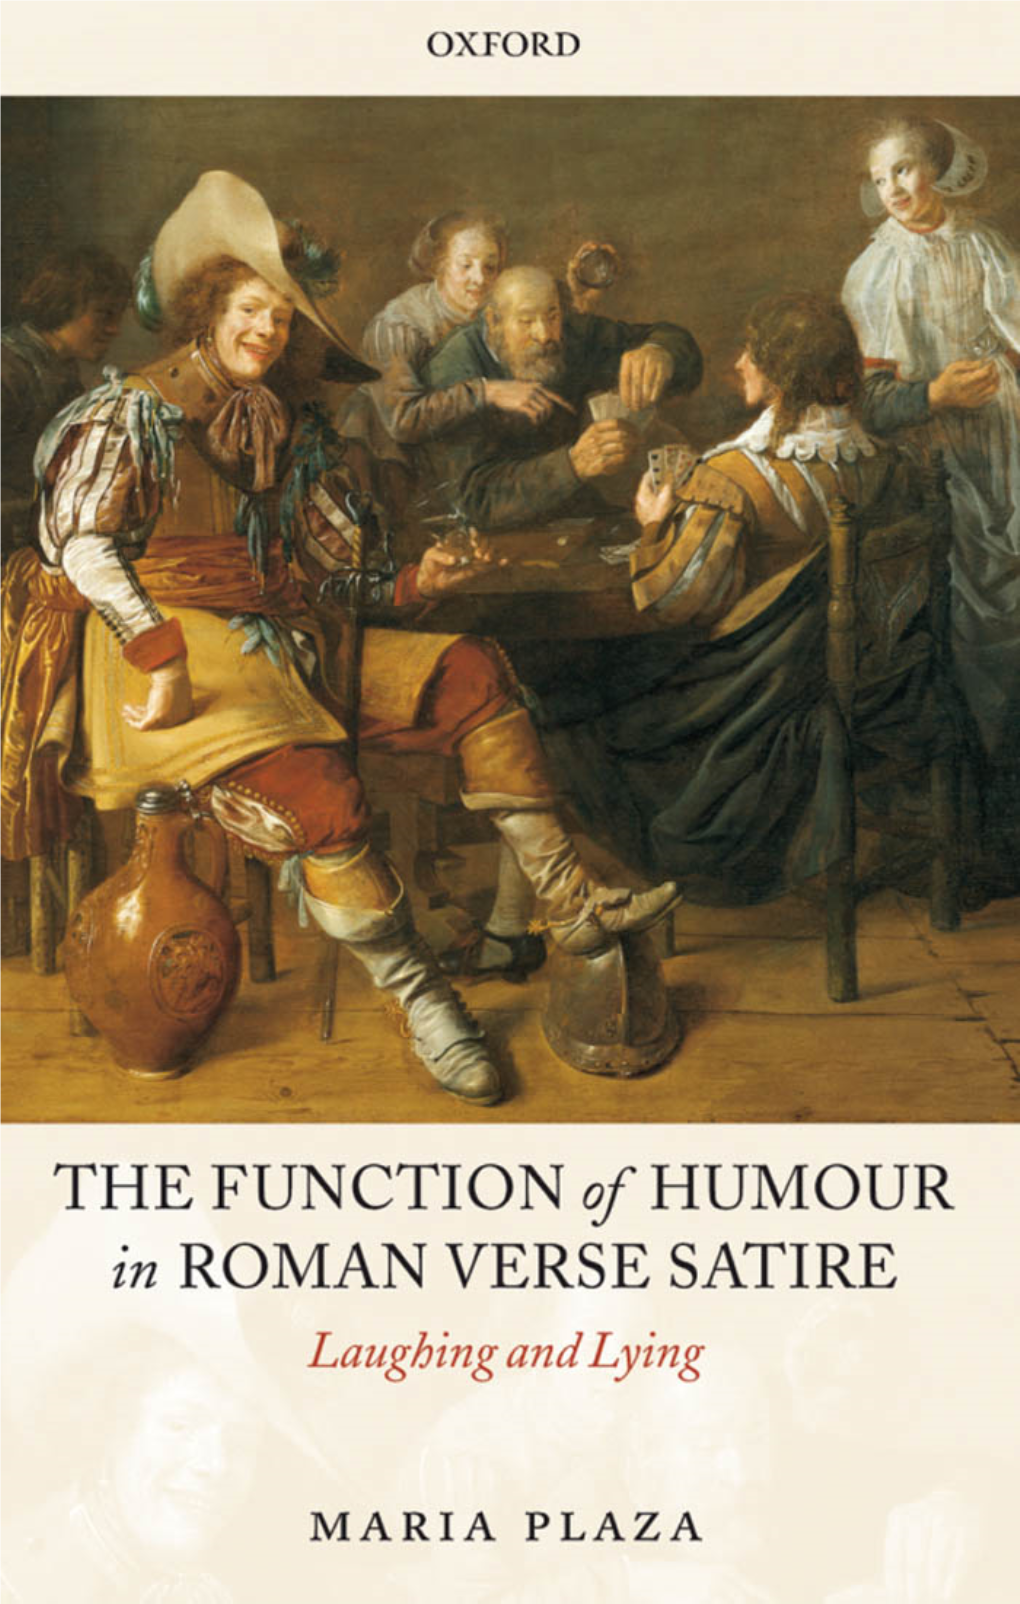 THE FUNCTION of HUMOUR in ROMAN VERSE SATIRE This Page Intentionally Left Blank the Function of Humour in Roman Verse Satire Laughing and Lying